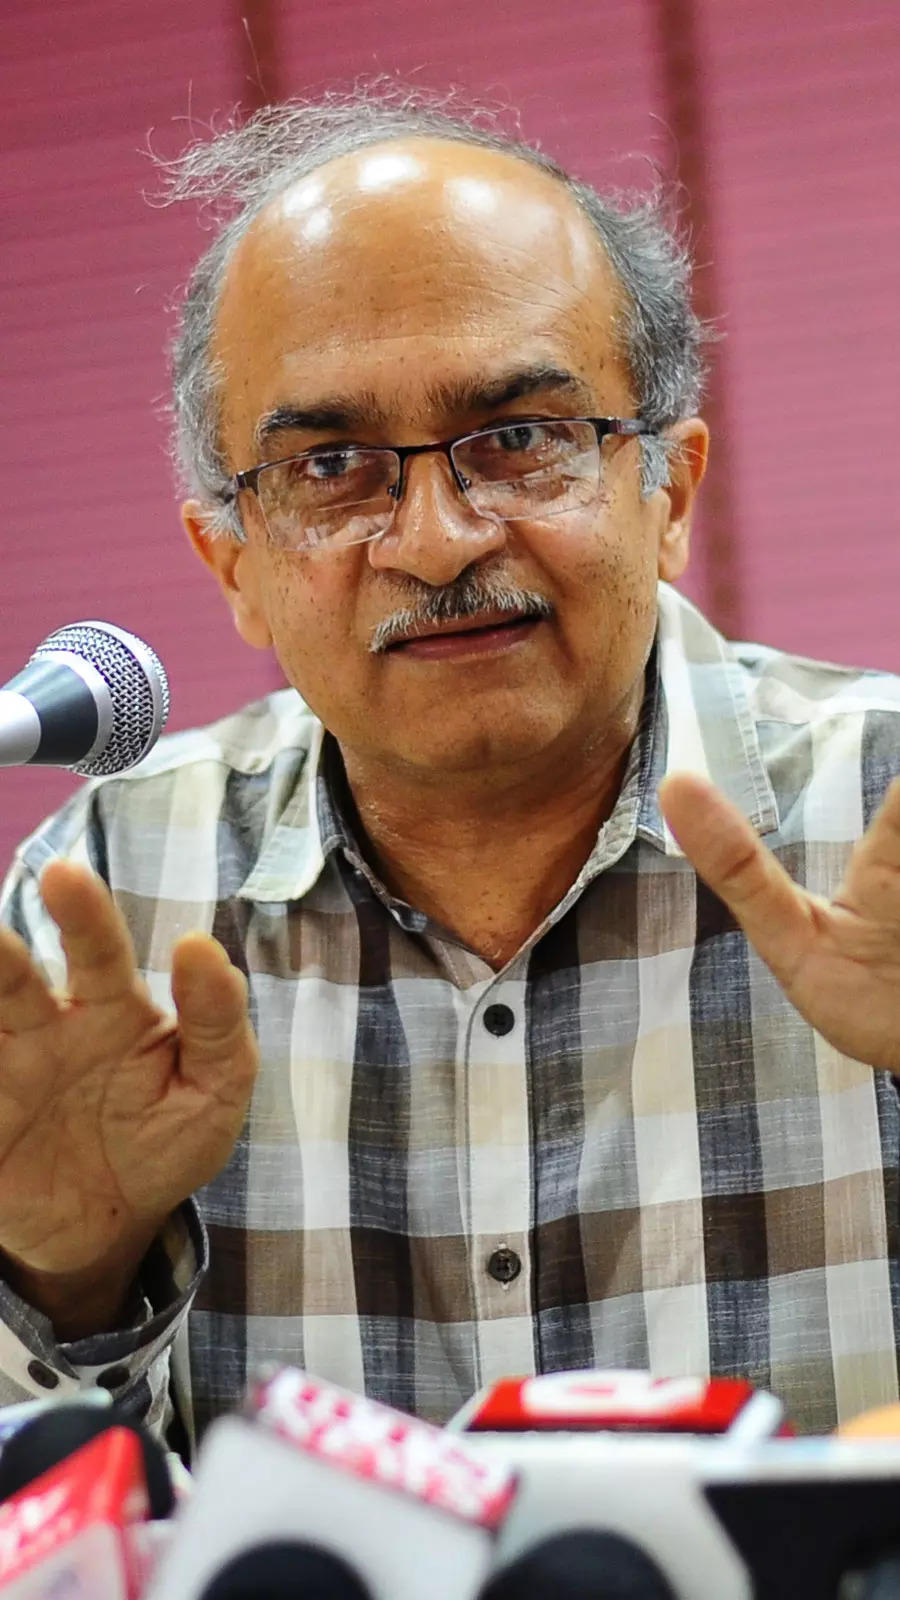 <p>Prashant Bhushan has received several awards and accolades for his contributions to law and public service, including the Ramon Magsaysay Award for Emergent Leadership in 2011.</p>